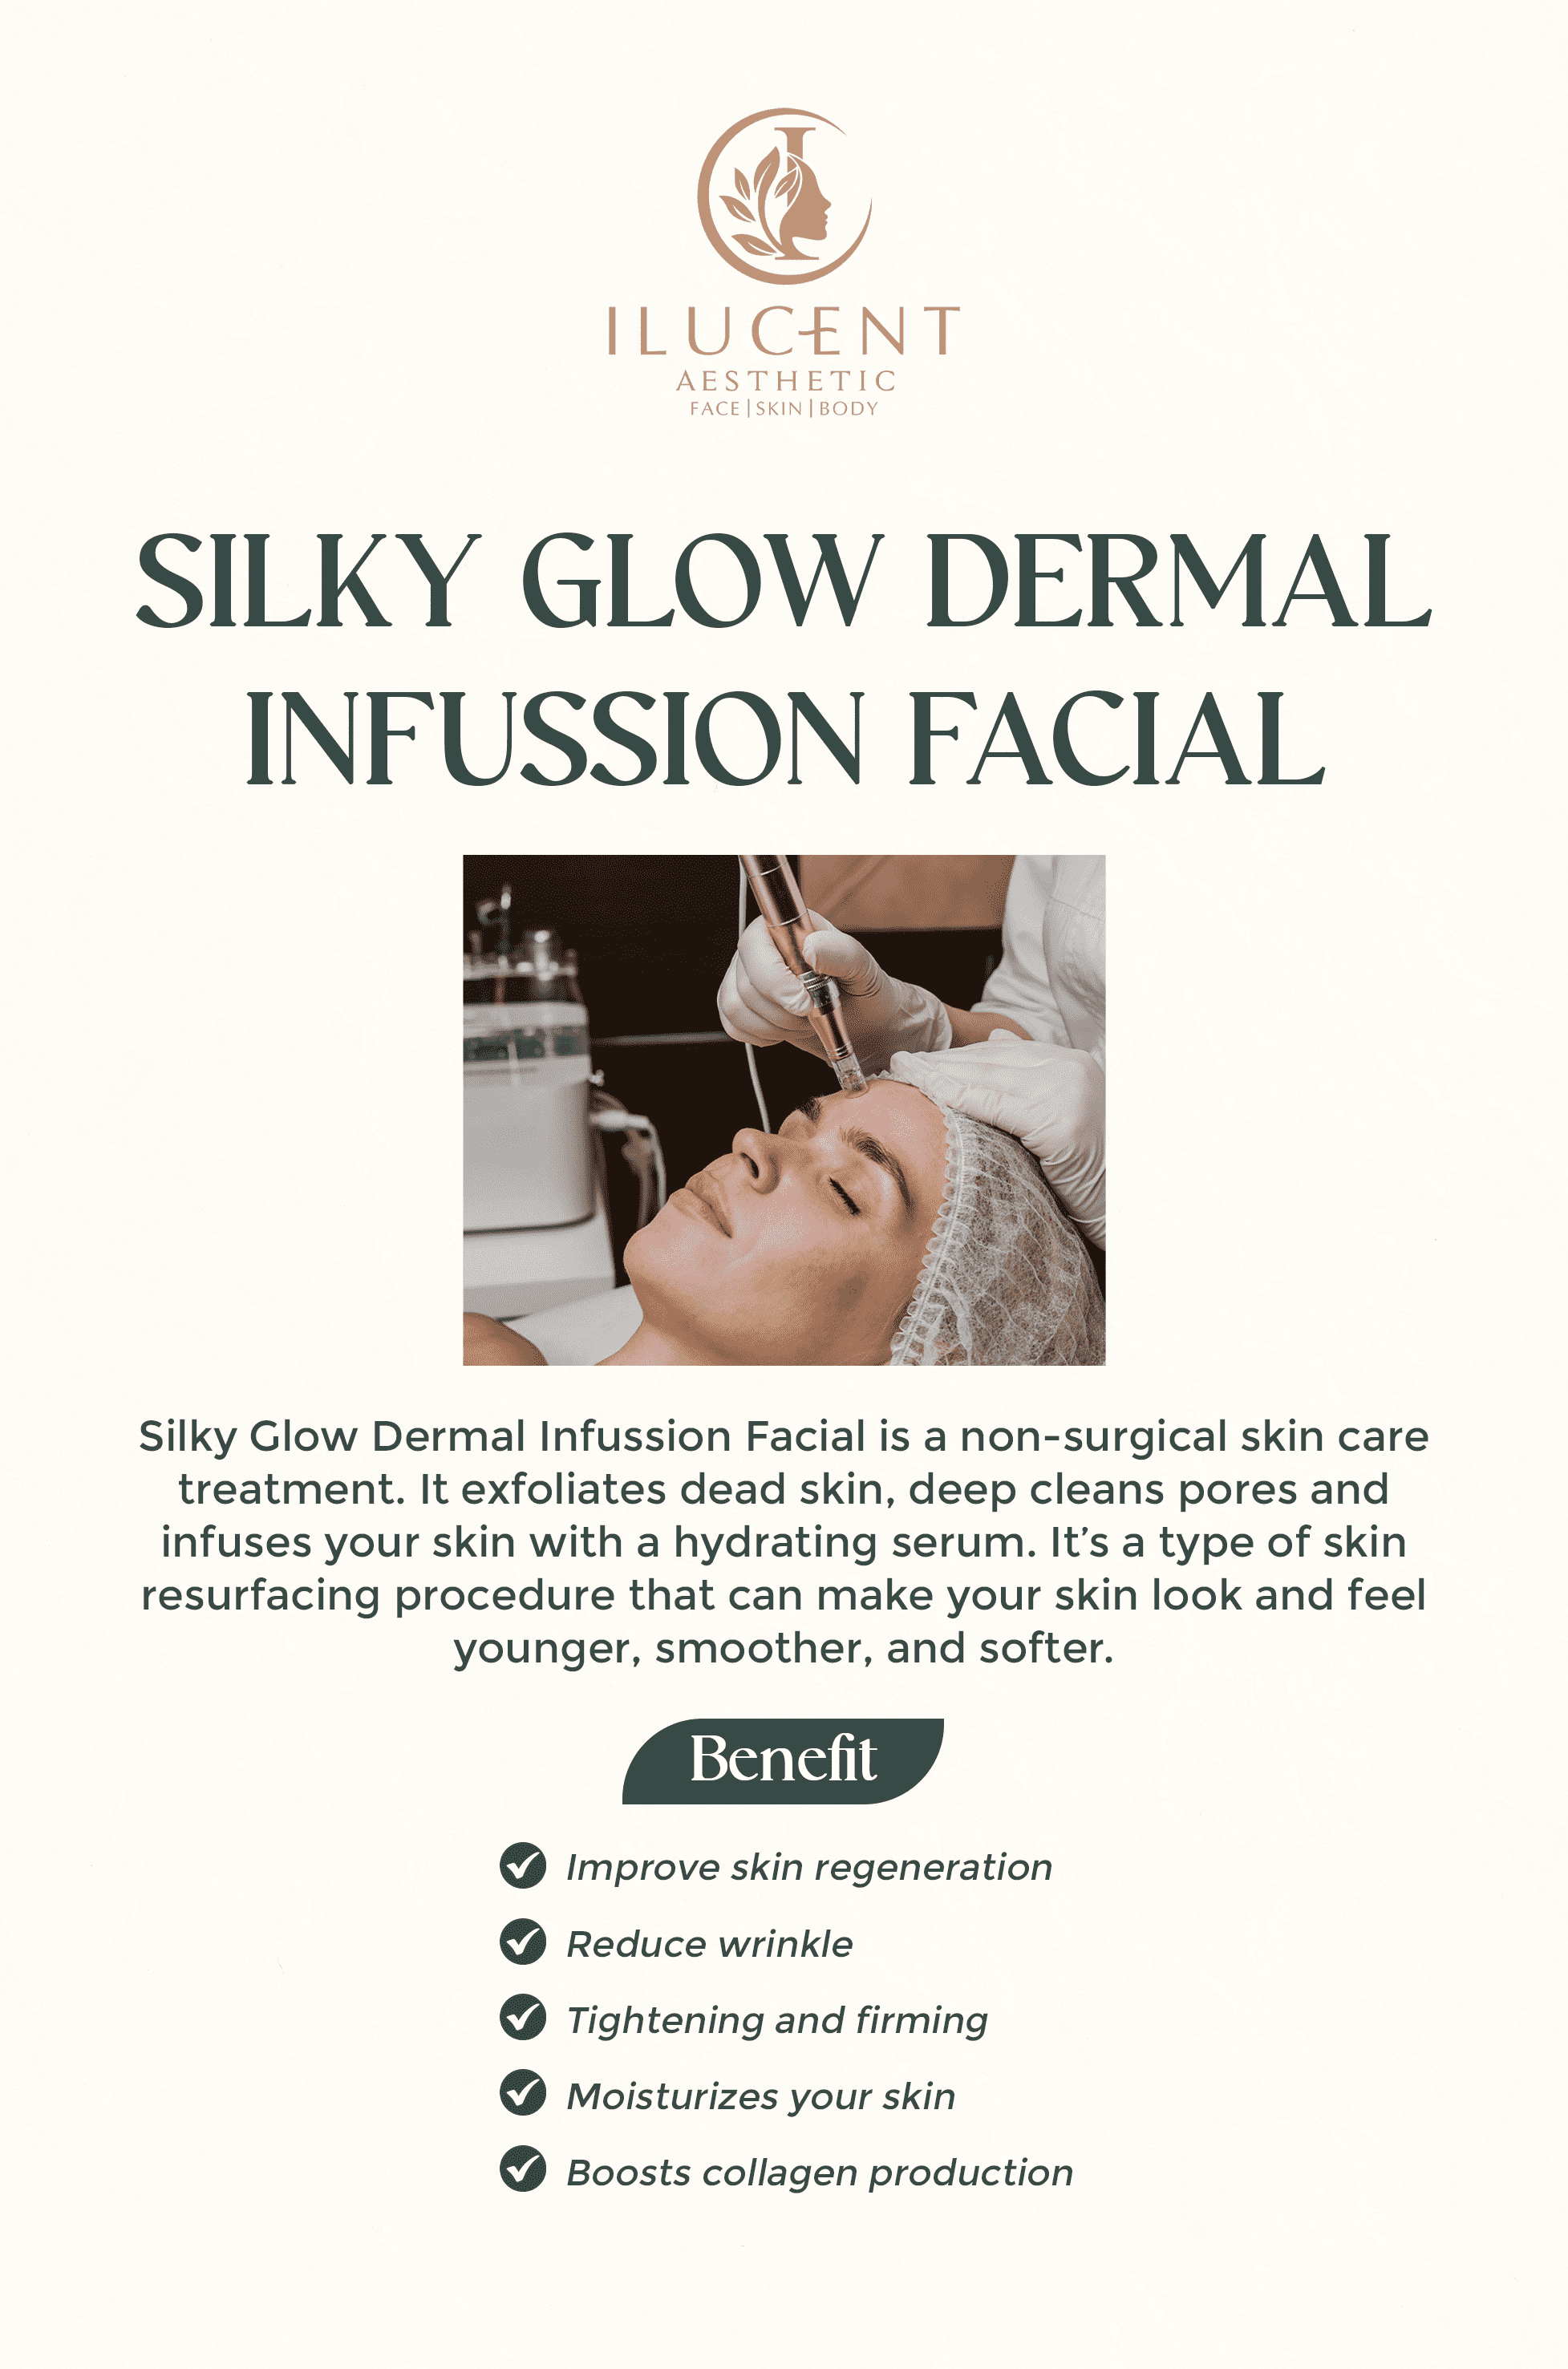 Silky Glow Dermal Infussion Facial